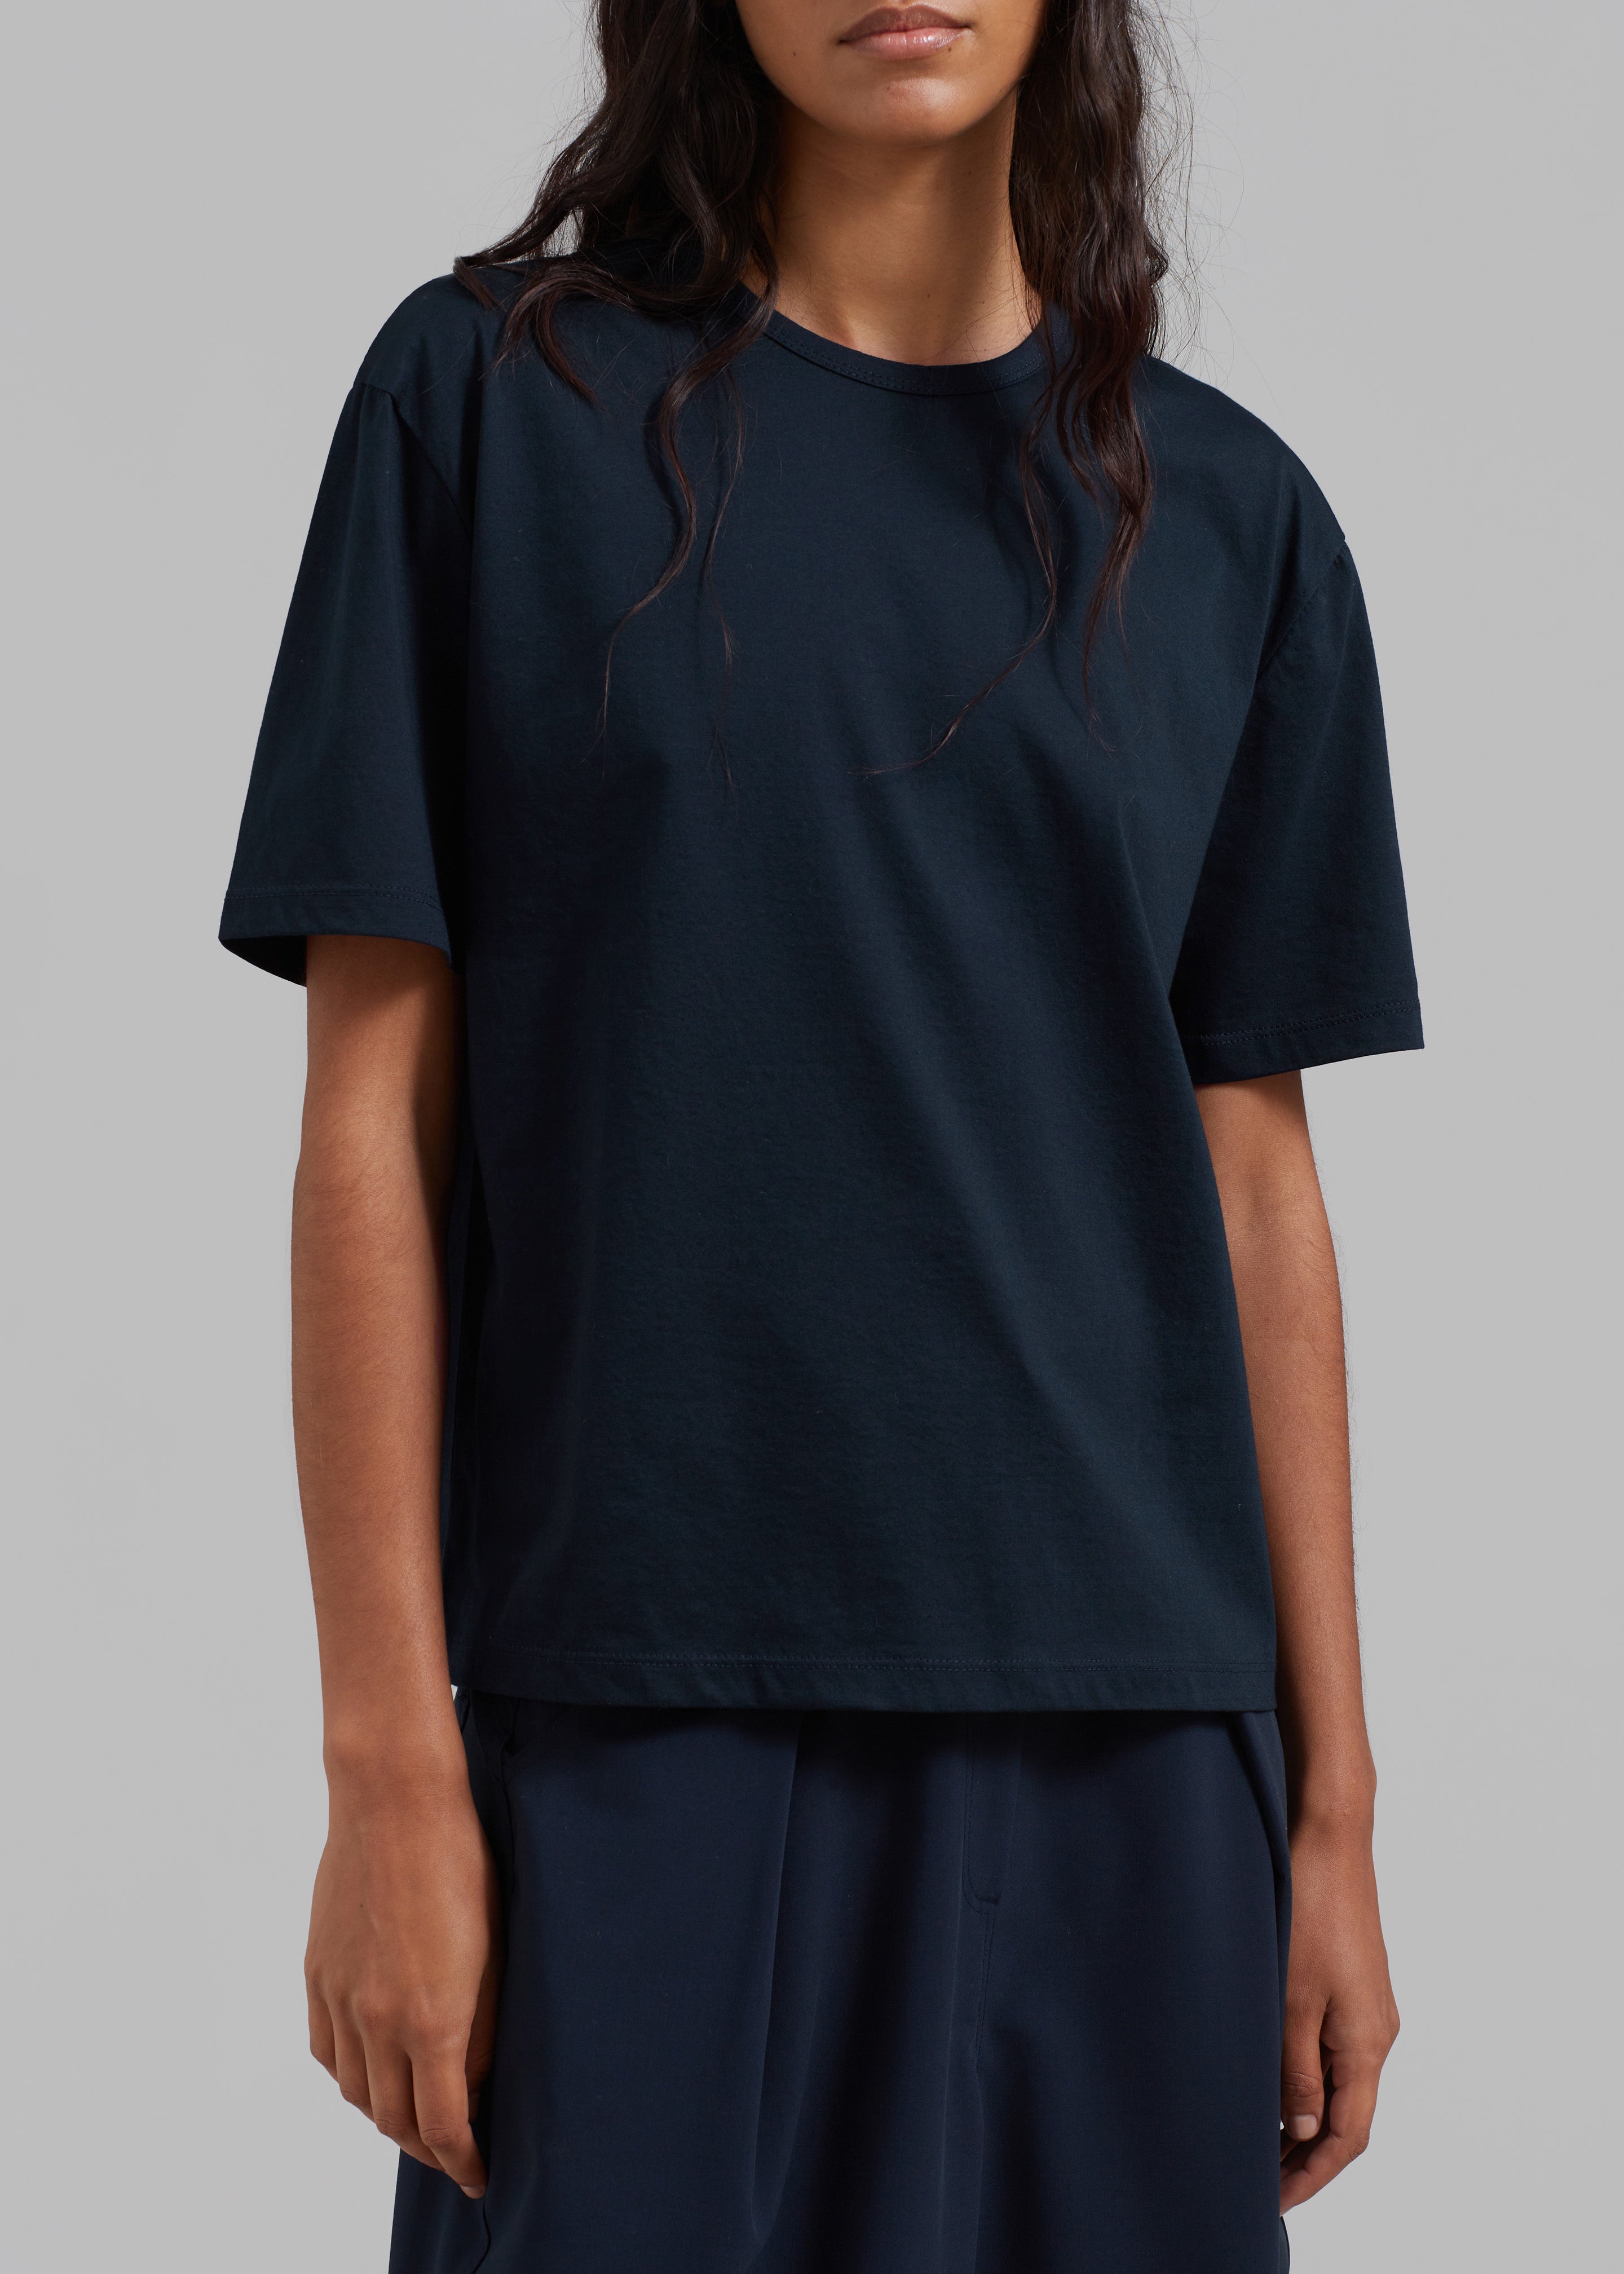 Connell Boxy Tee - Navy - 6